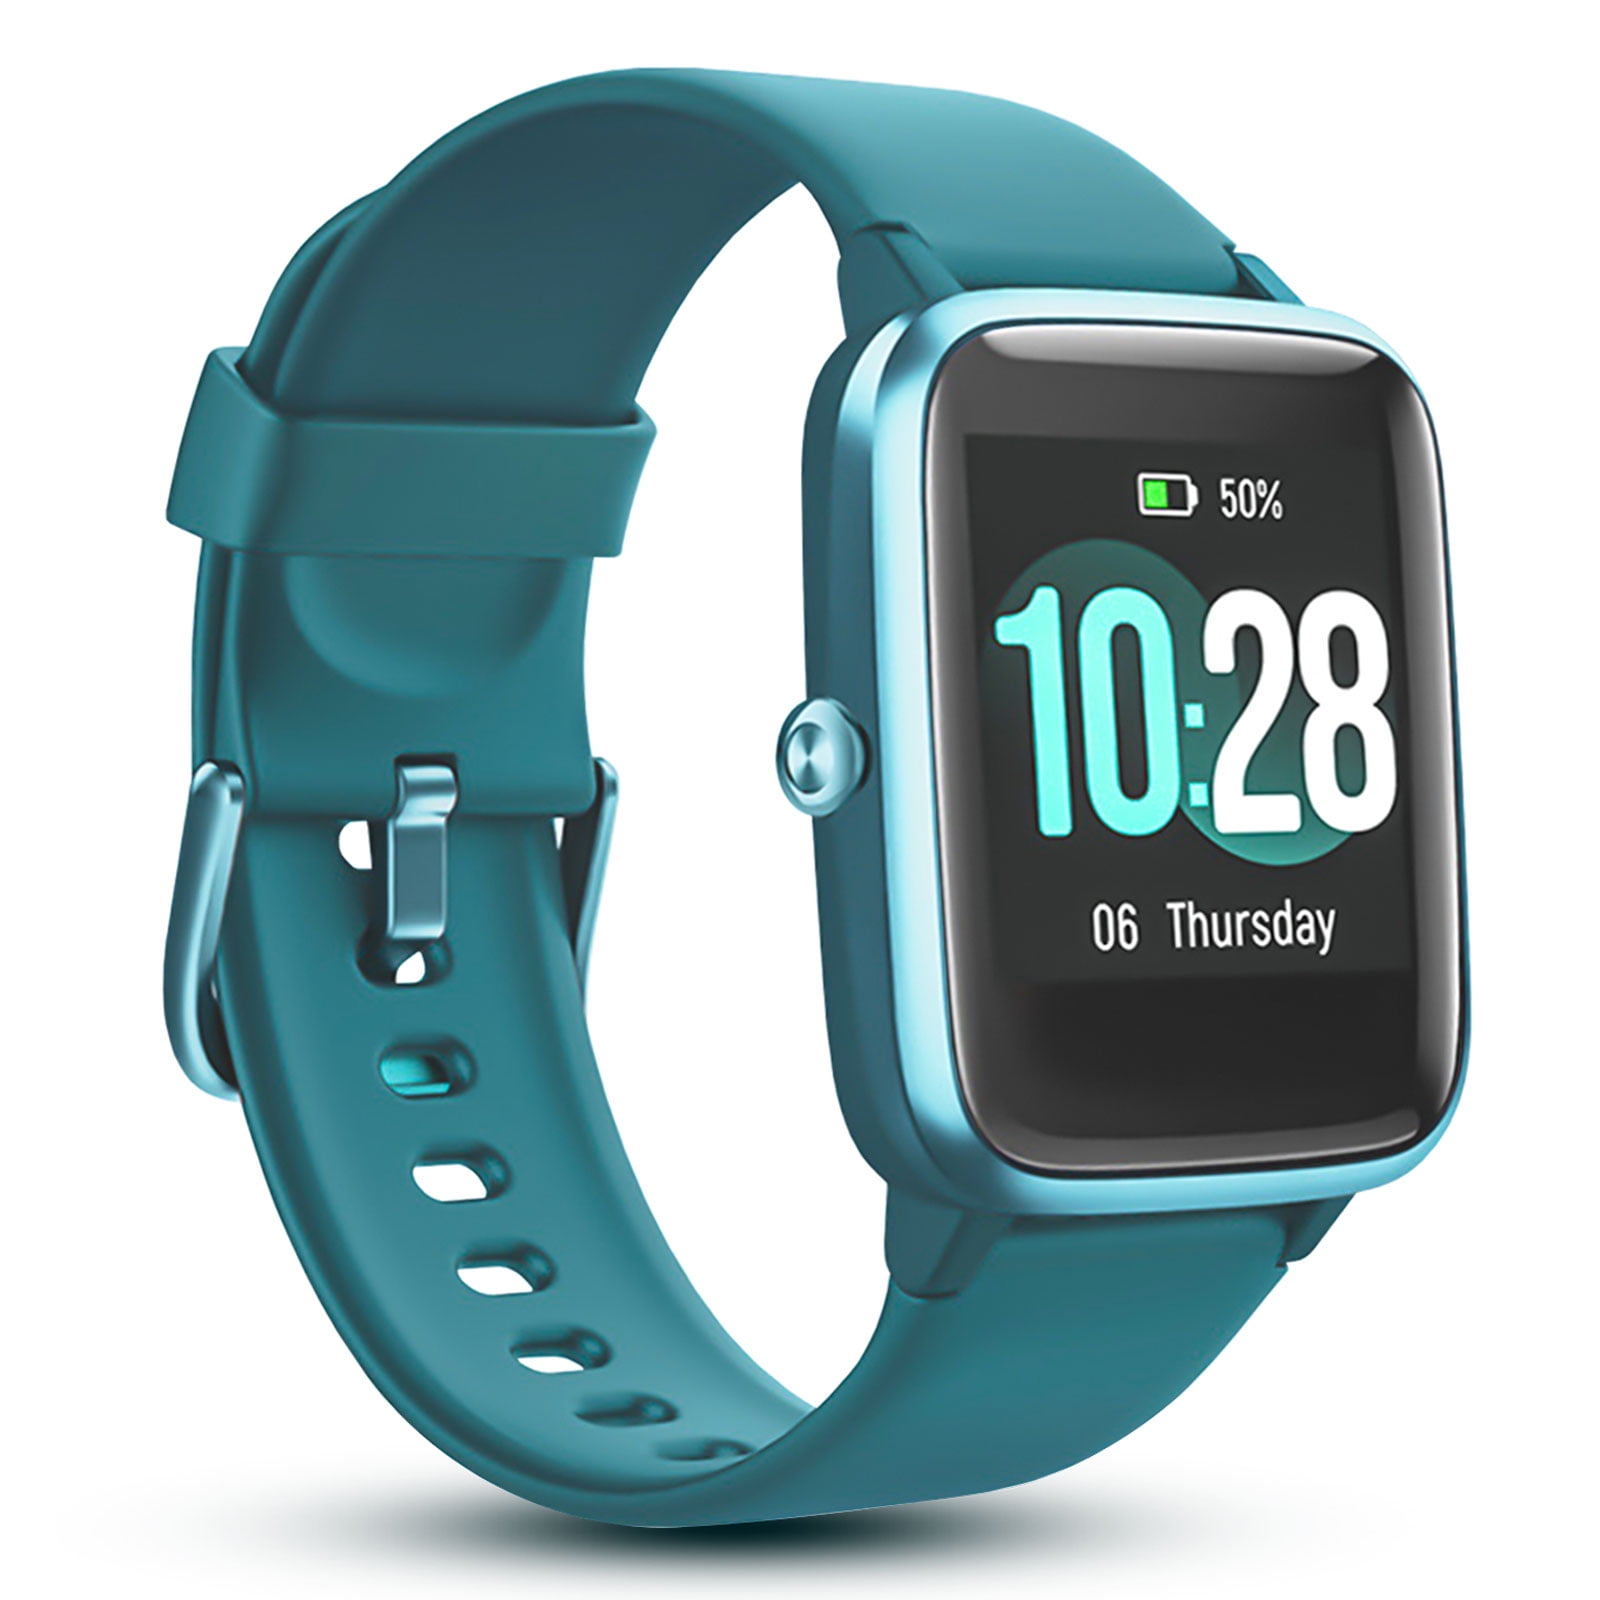 2021 Newest Smart Watch for Android and iOS Phones